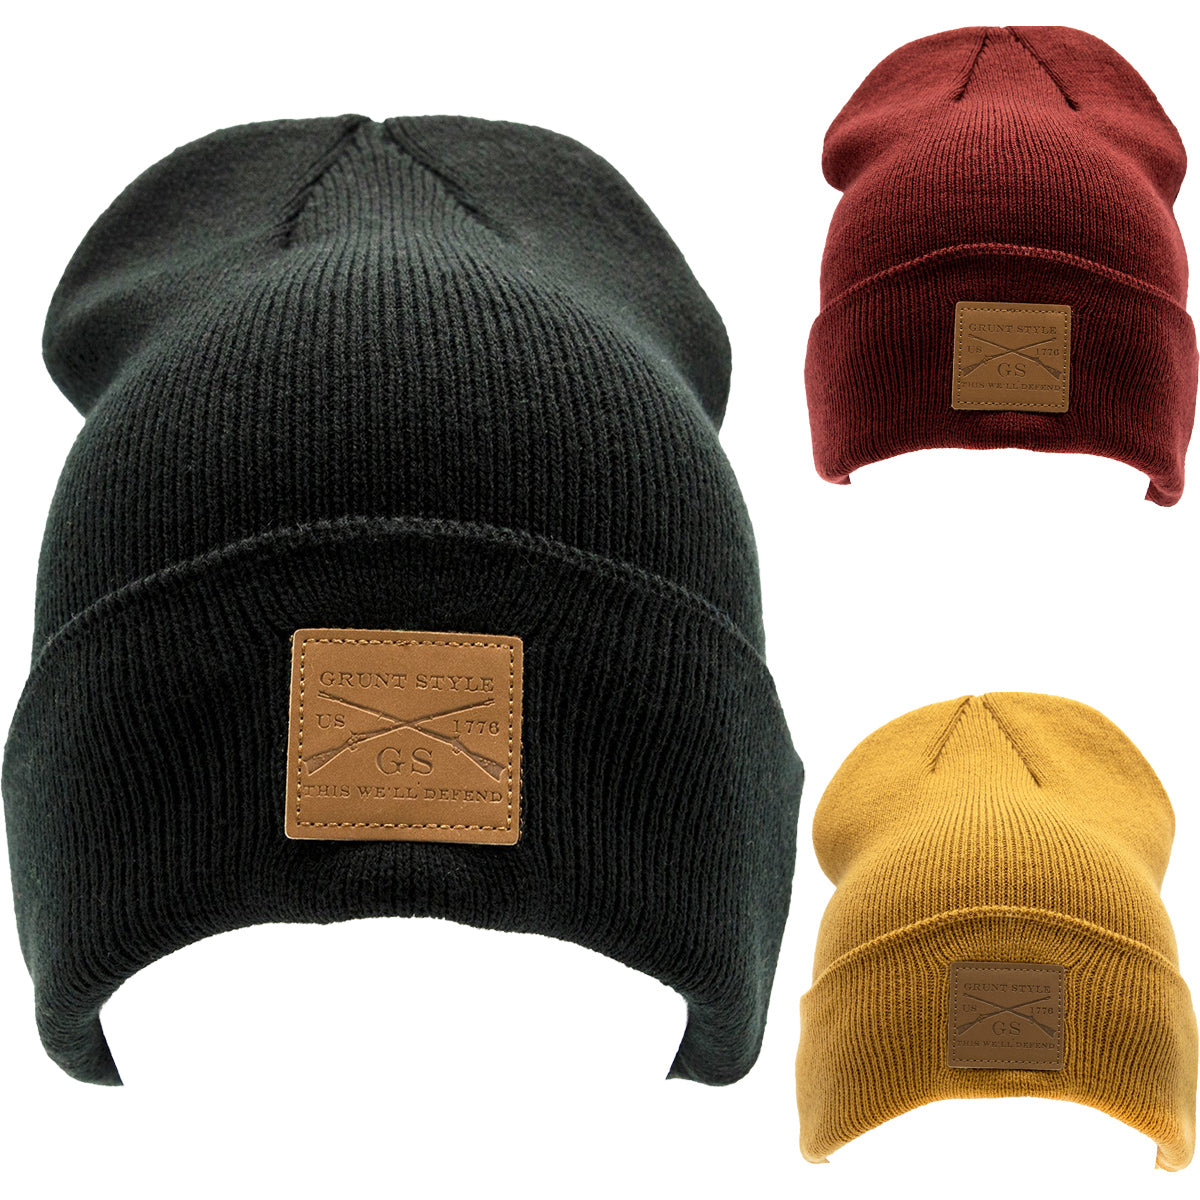 Grunt Style Leather Patch Cuffed Beanie Grunt Style